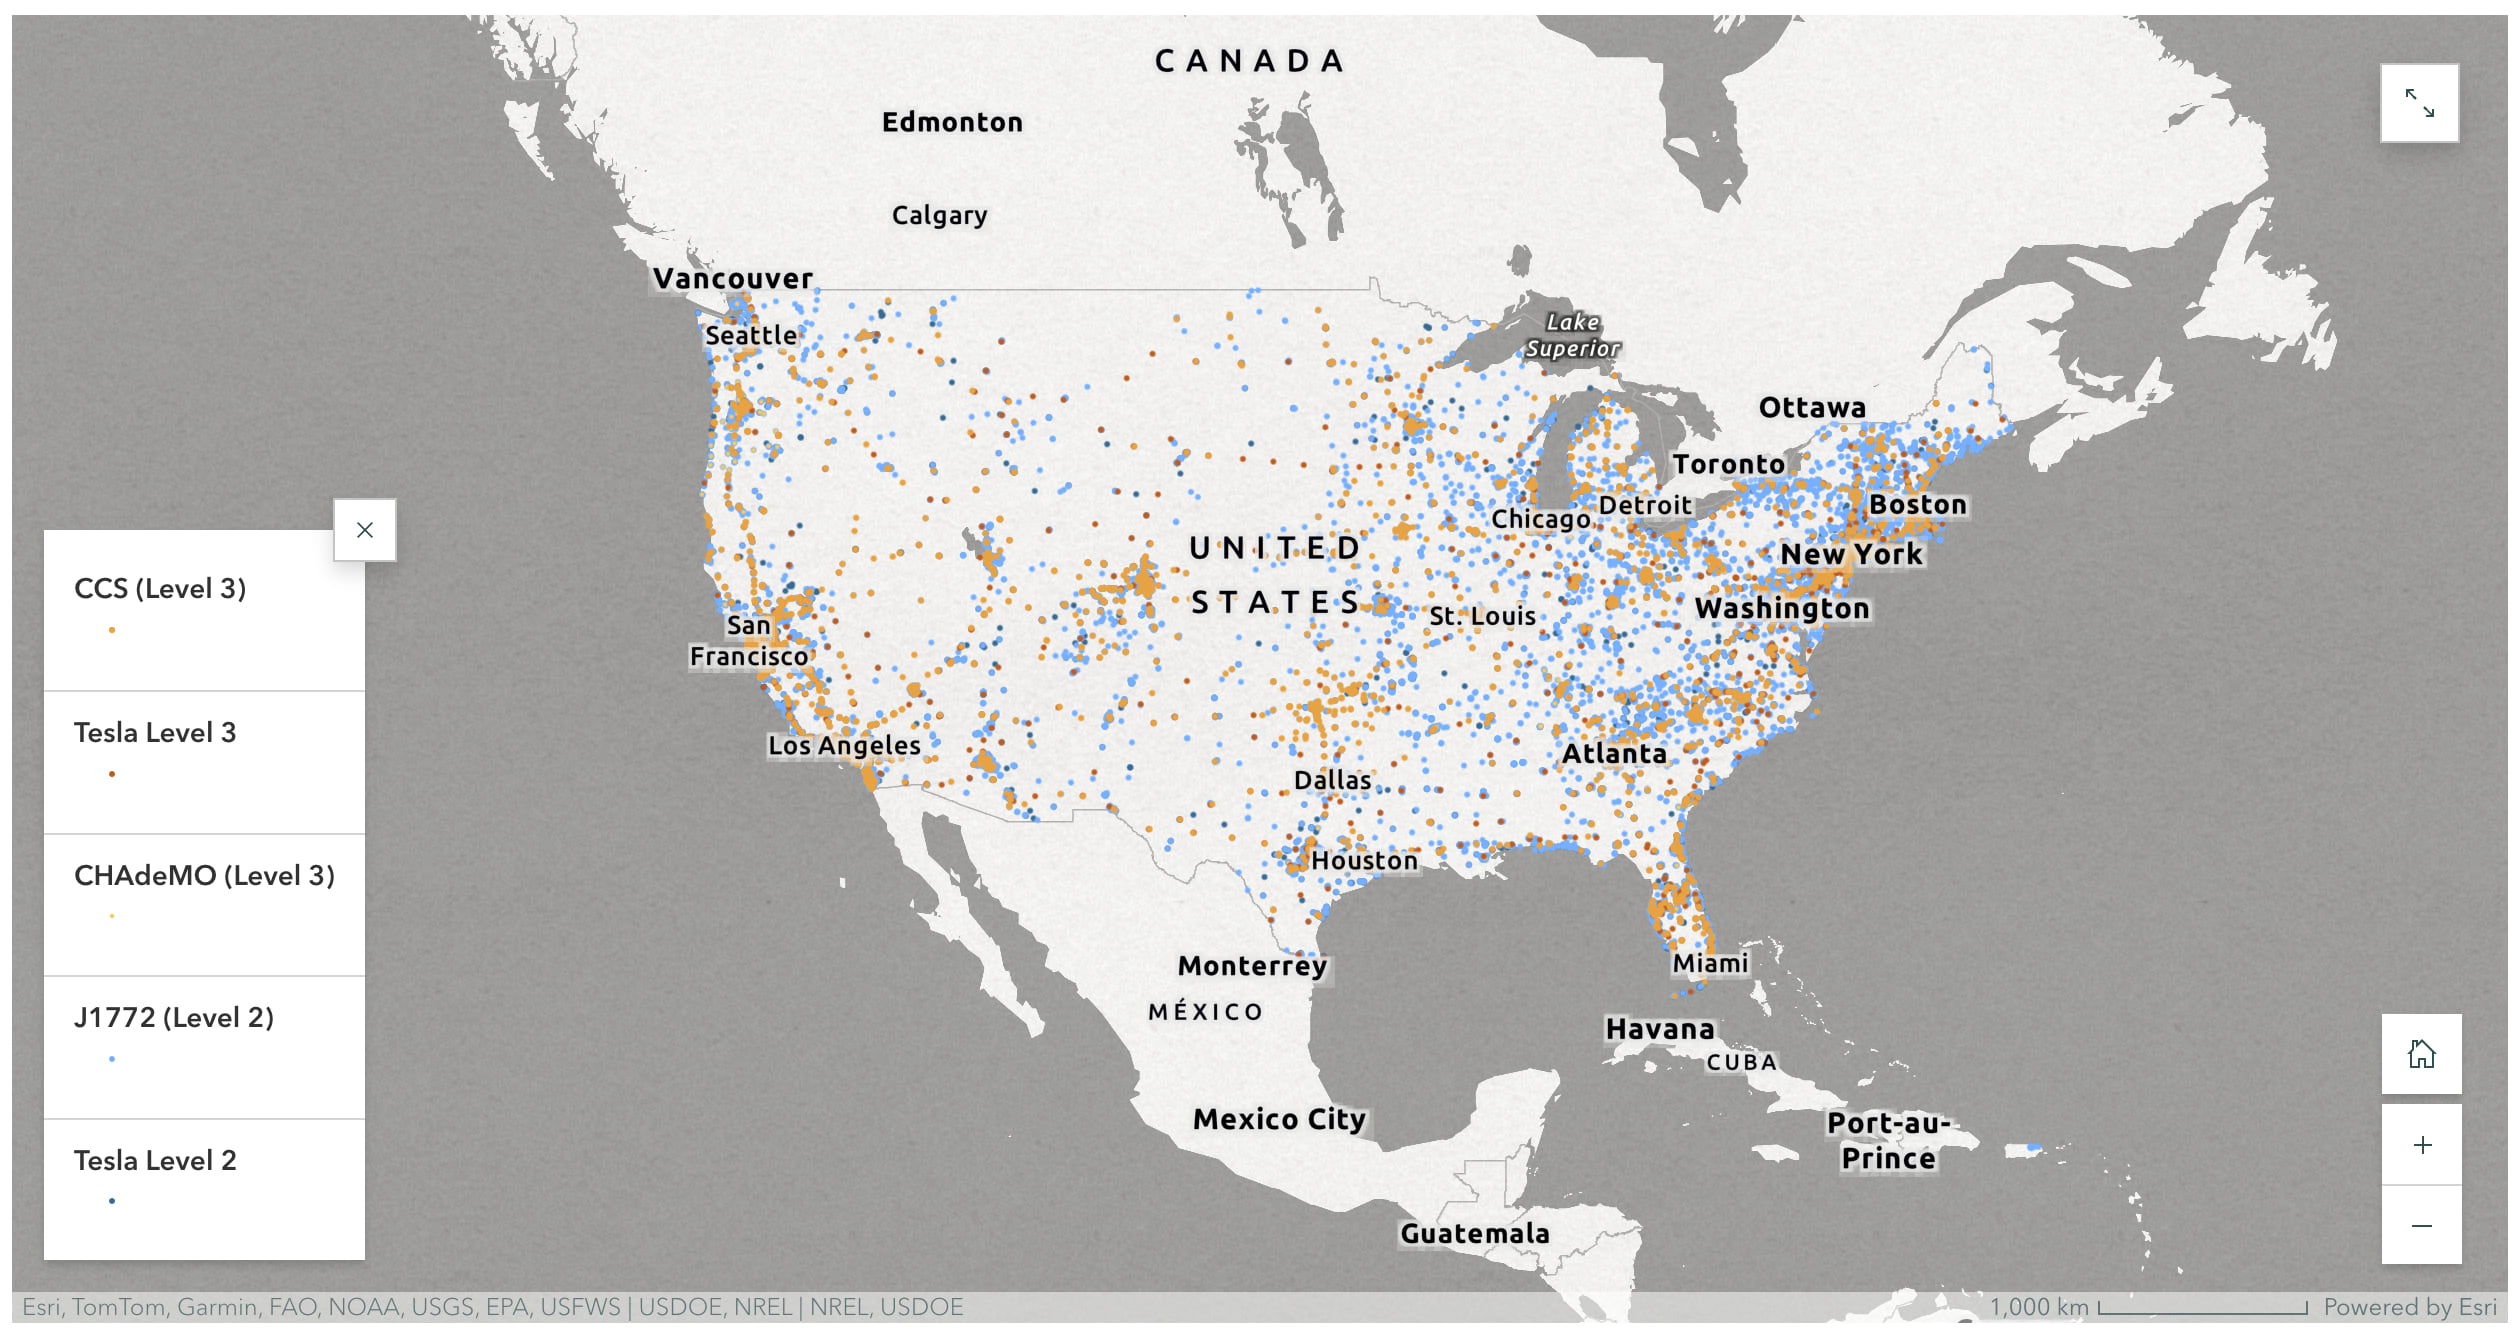 A screenshot of a web map in a story depicting all electric car chargers in the United States, with the legend open.